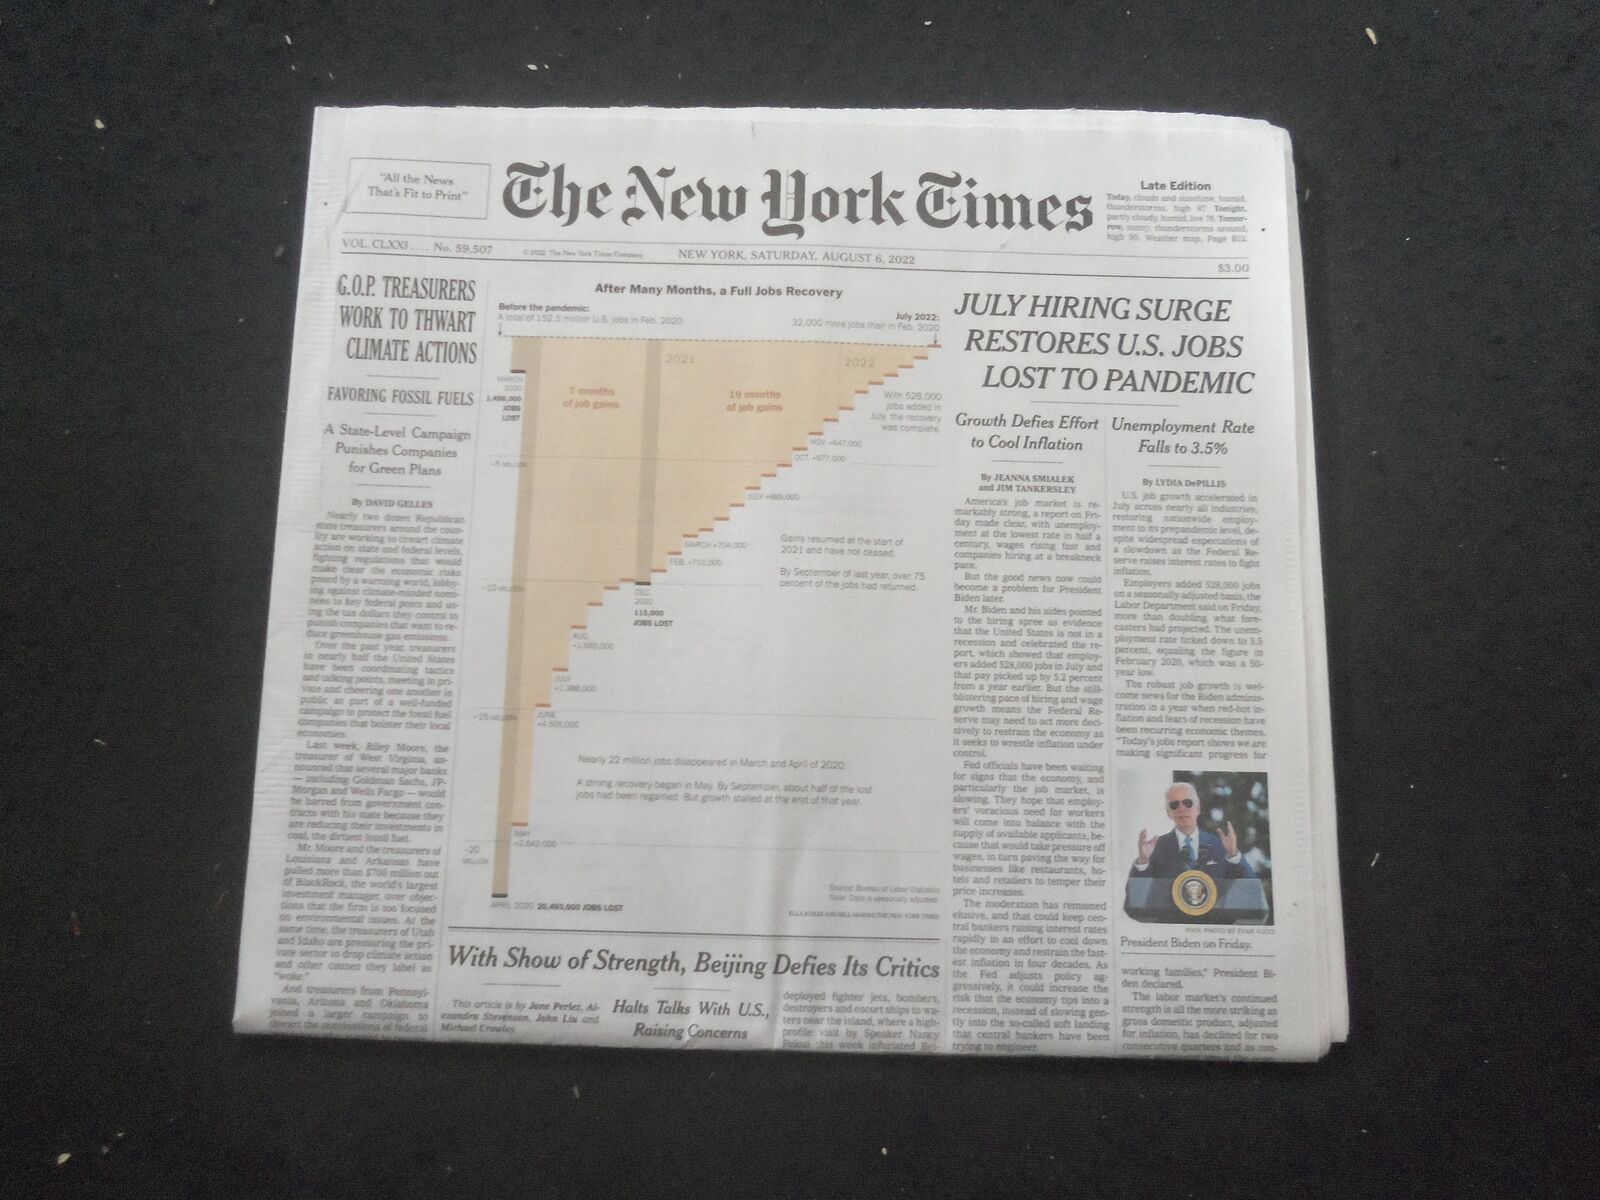 2022 AUG 6 NEW YORK TIMES JULY HIRING SURGE RESTORES U.S. JOBS LOST TO PANDEMIC